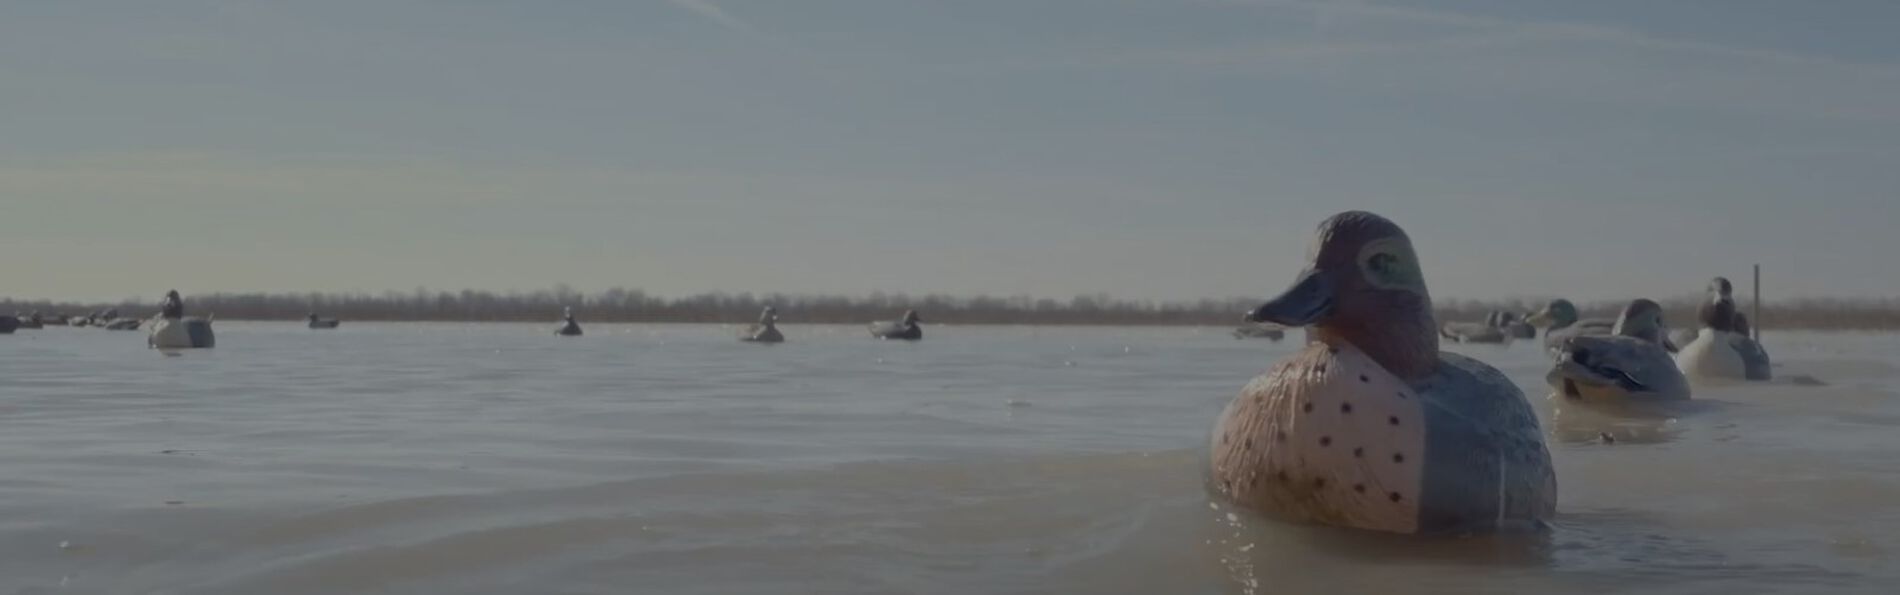 Decoys floating on a pond